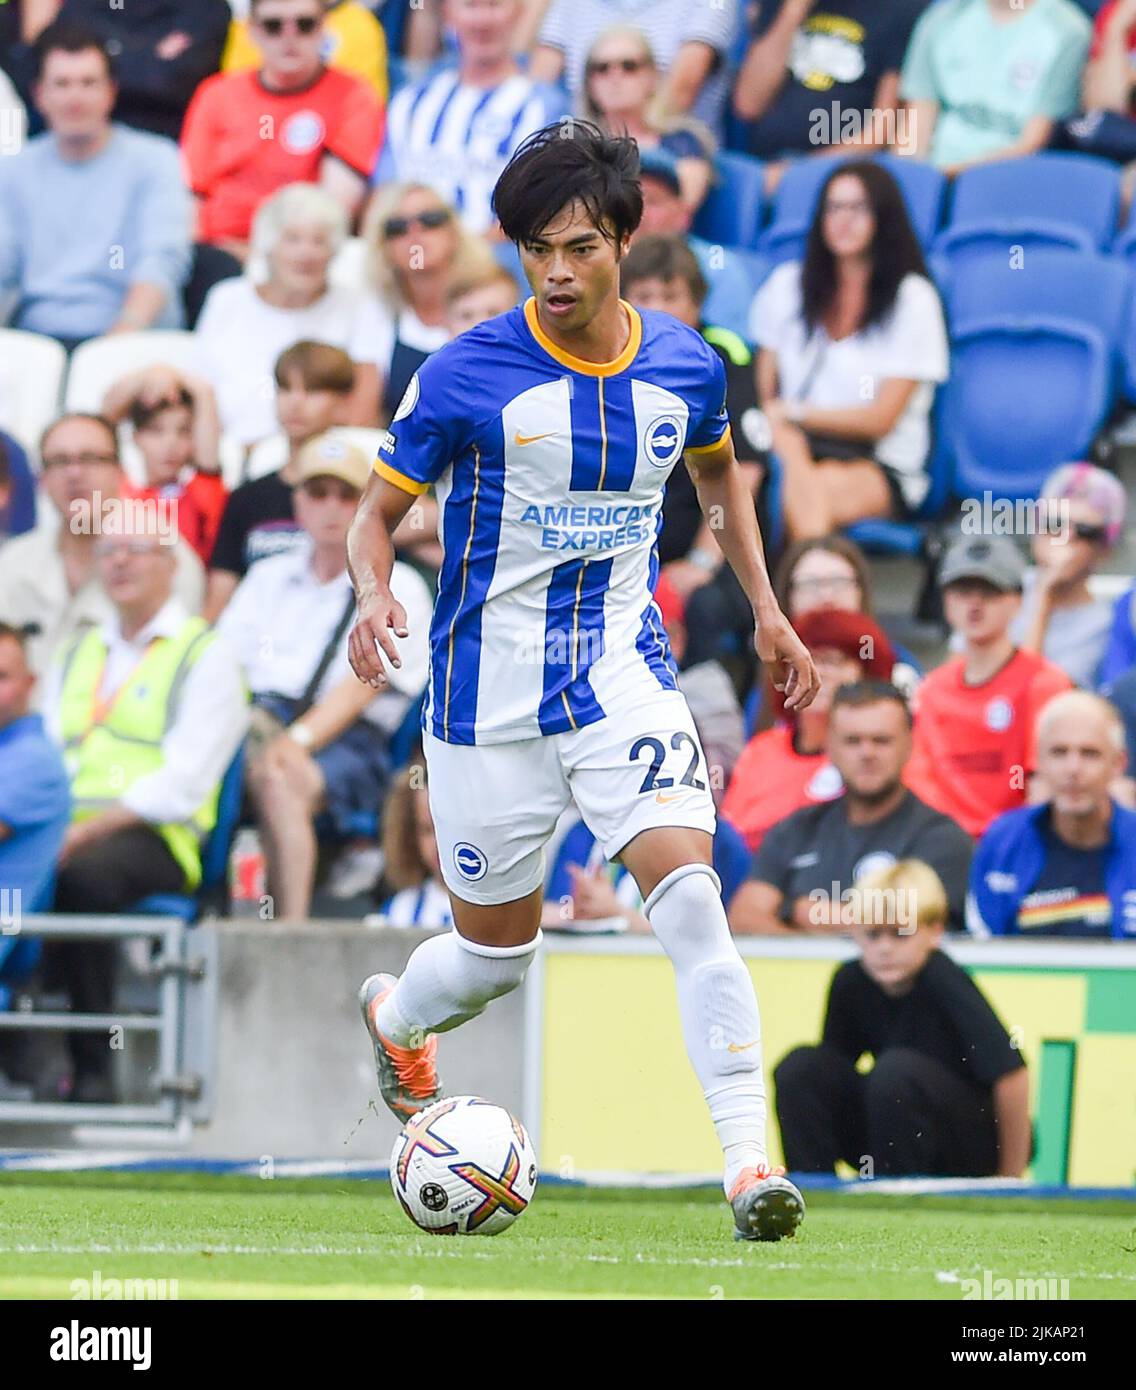 Kaoru Mitoma of Brighton during the Pre Season friendly match between Brighton and Hove Albion and Espanyol at  the American Express Community Stadium, Brighton, UK - 30th July 2022  Editorial use only. No merchandising. For Football images FA and Premier League restrictions apply inc. no internet/mobile usage without FAPL license - for details contact Football Dataco Stock Photo